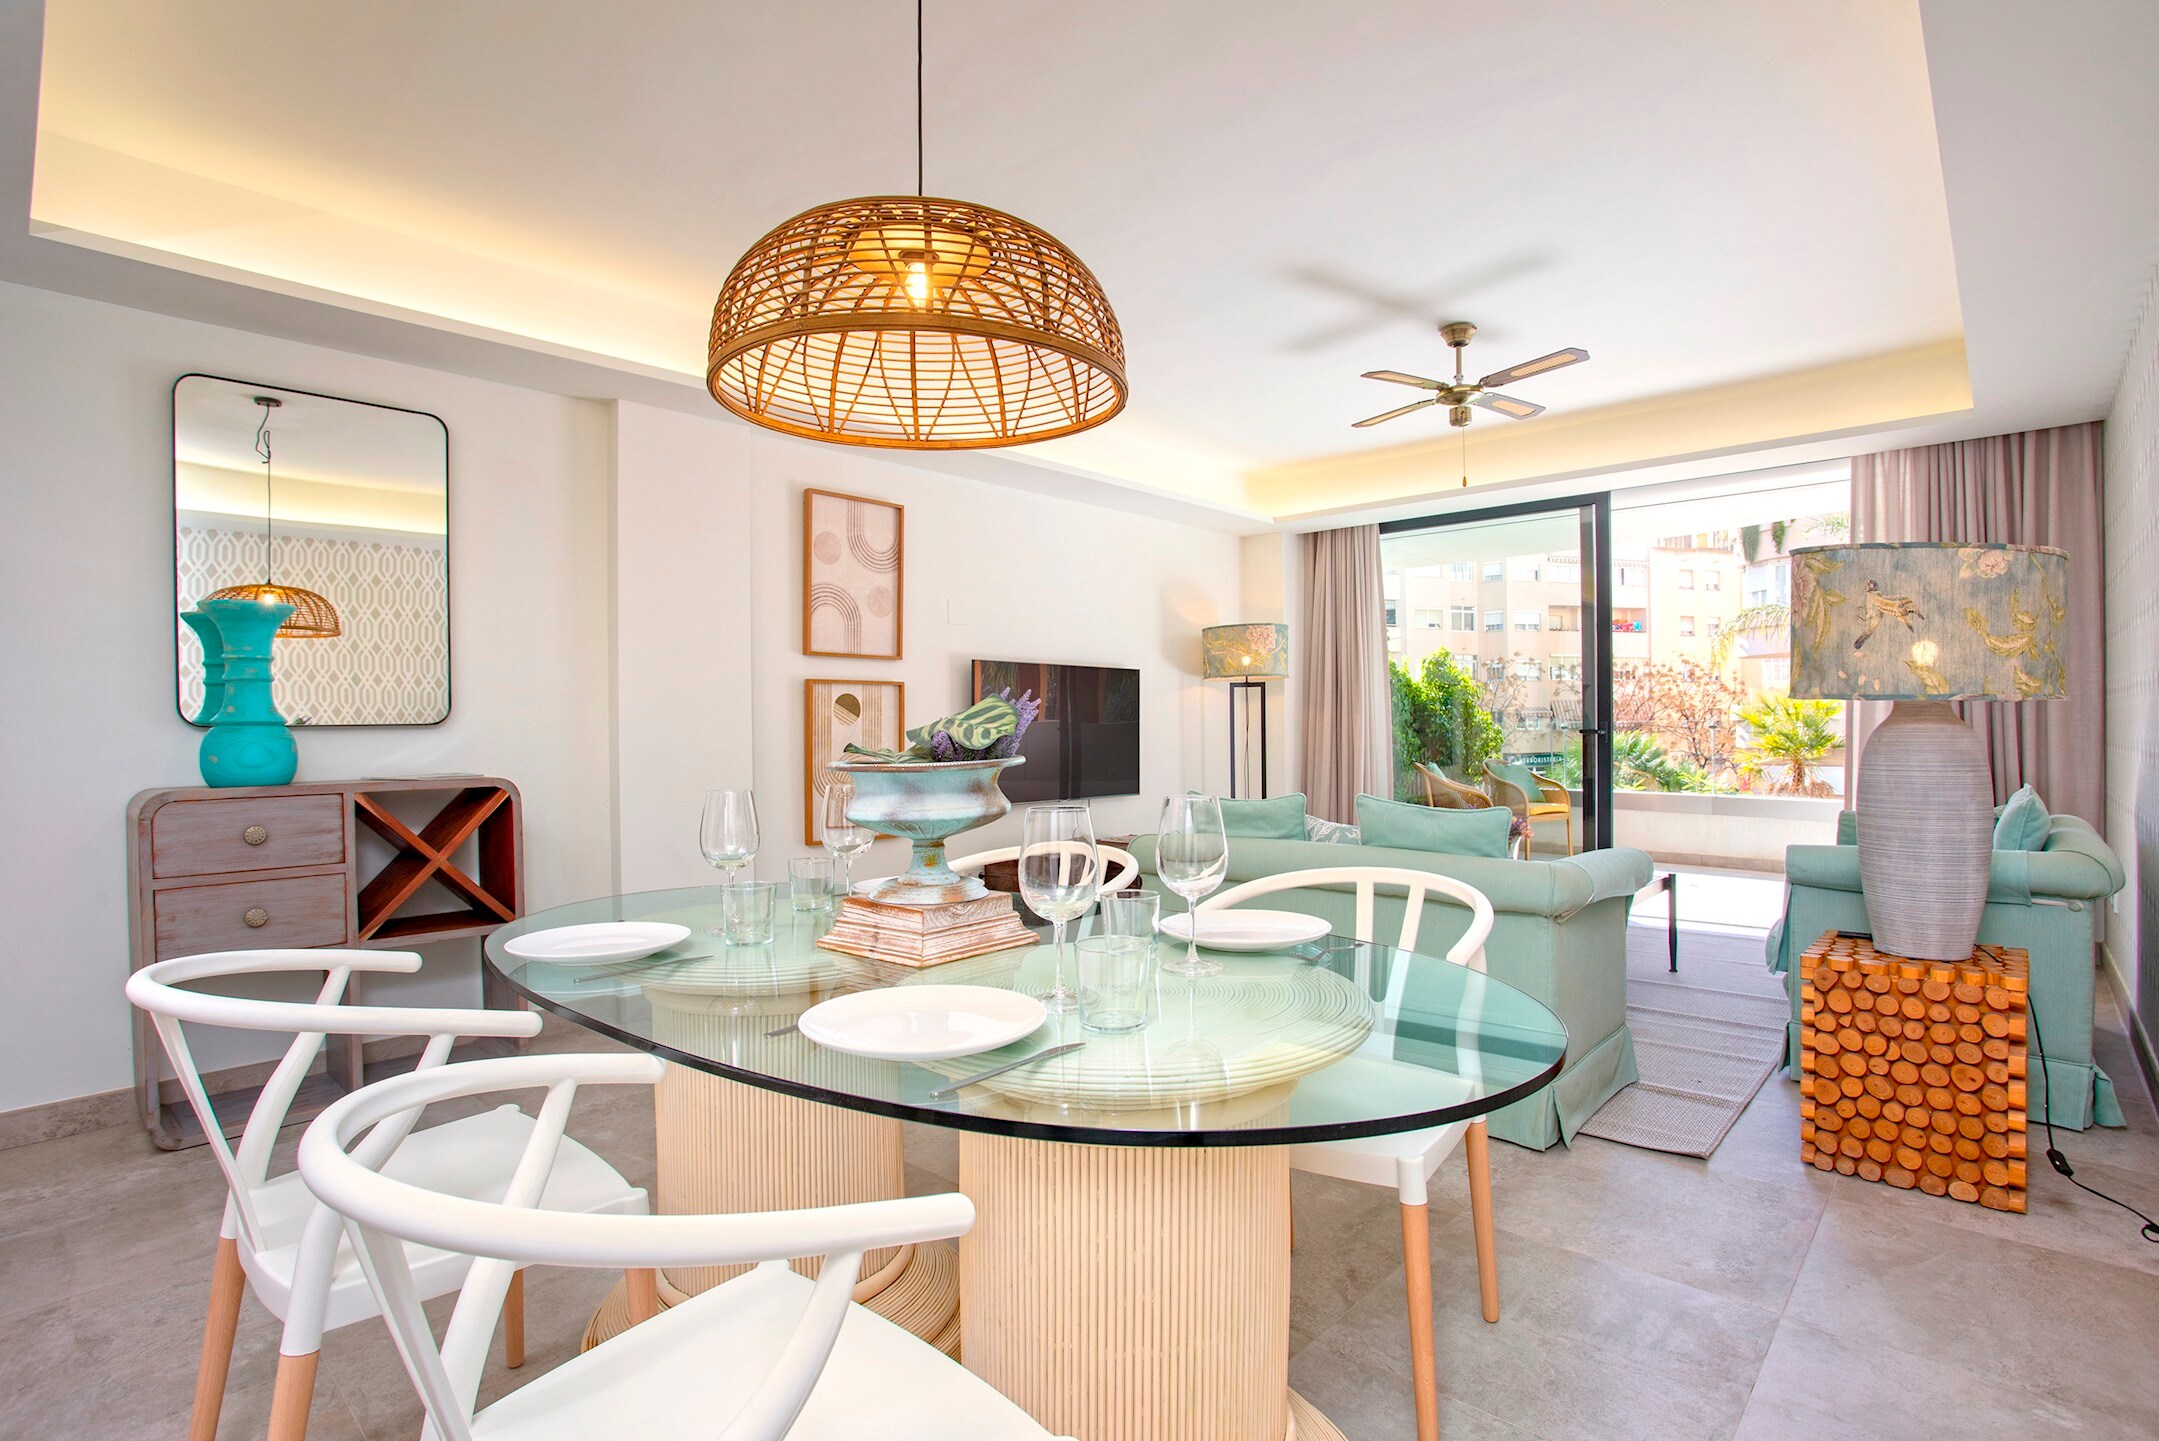 Property Image 1 - Exclusive apartment in estepona center. Infinity